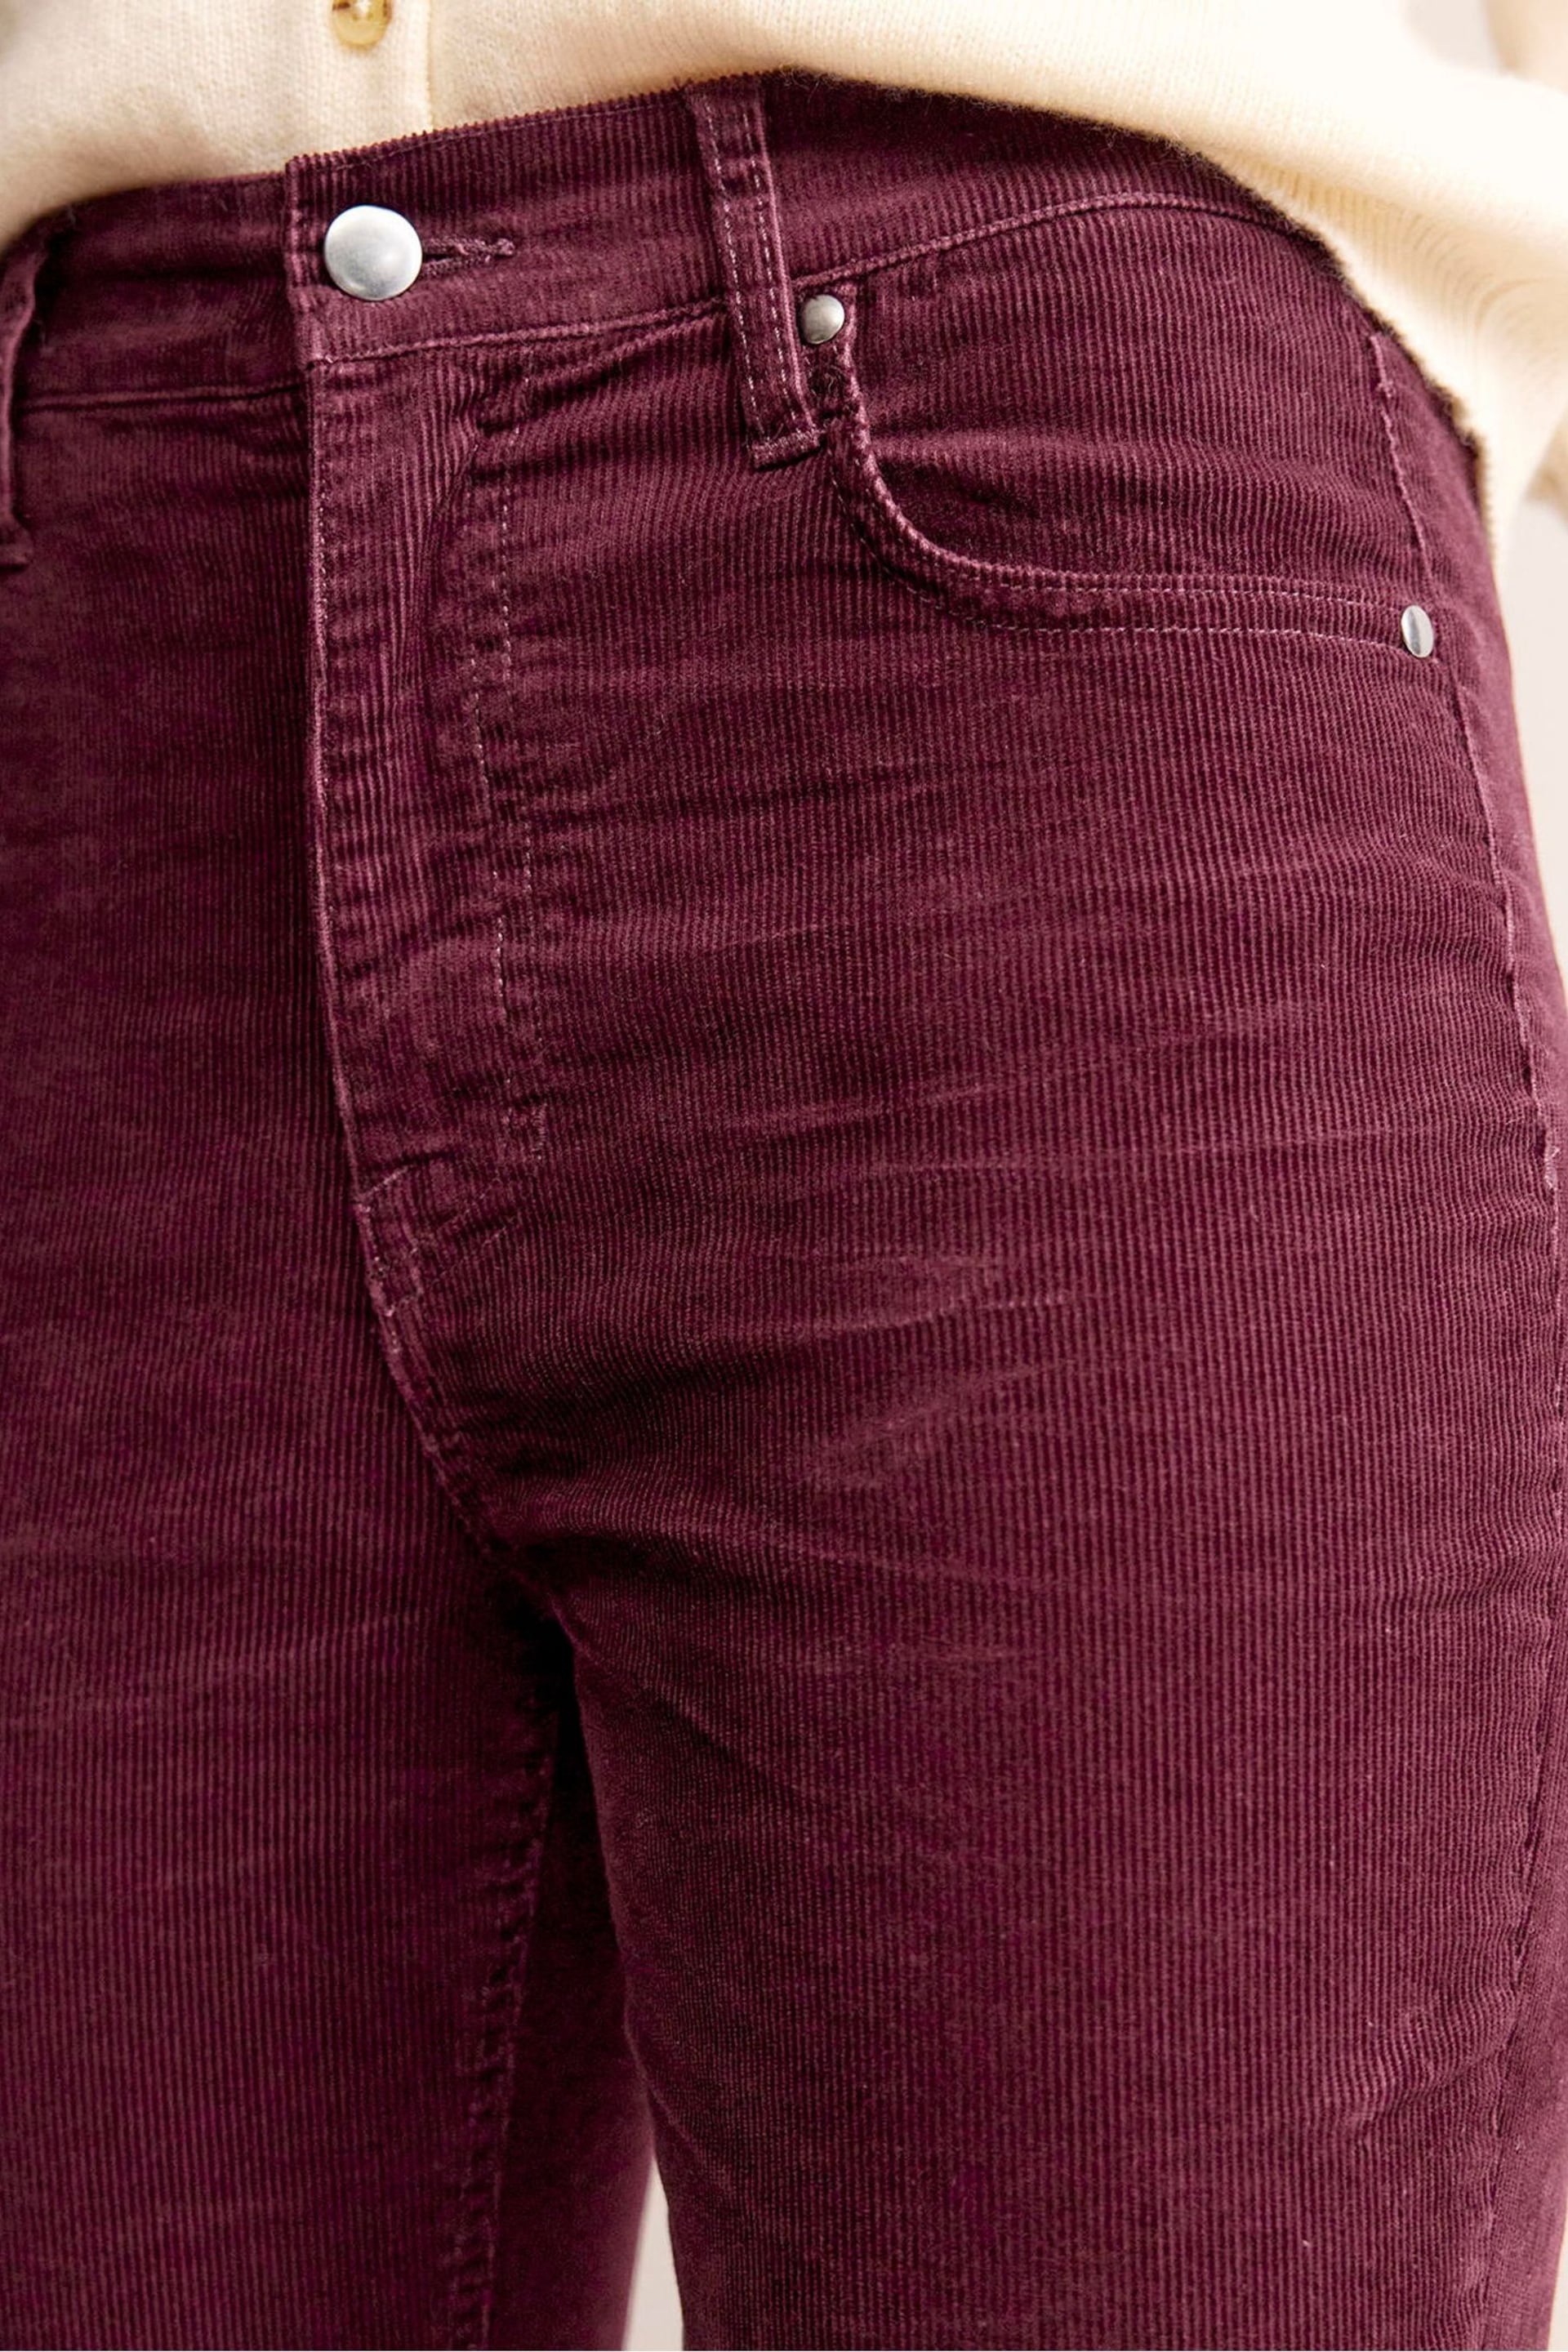 Boden Red Slim Corduroy Straight Jeans - Image 5 of 7